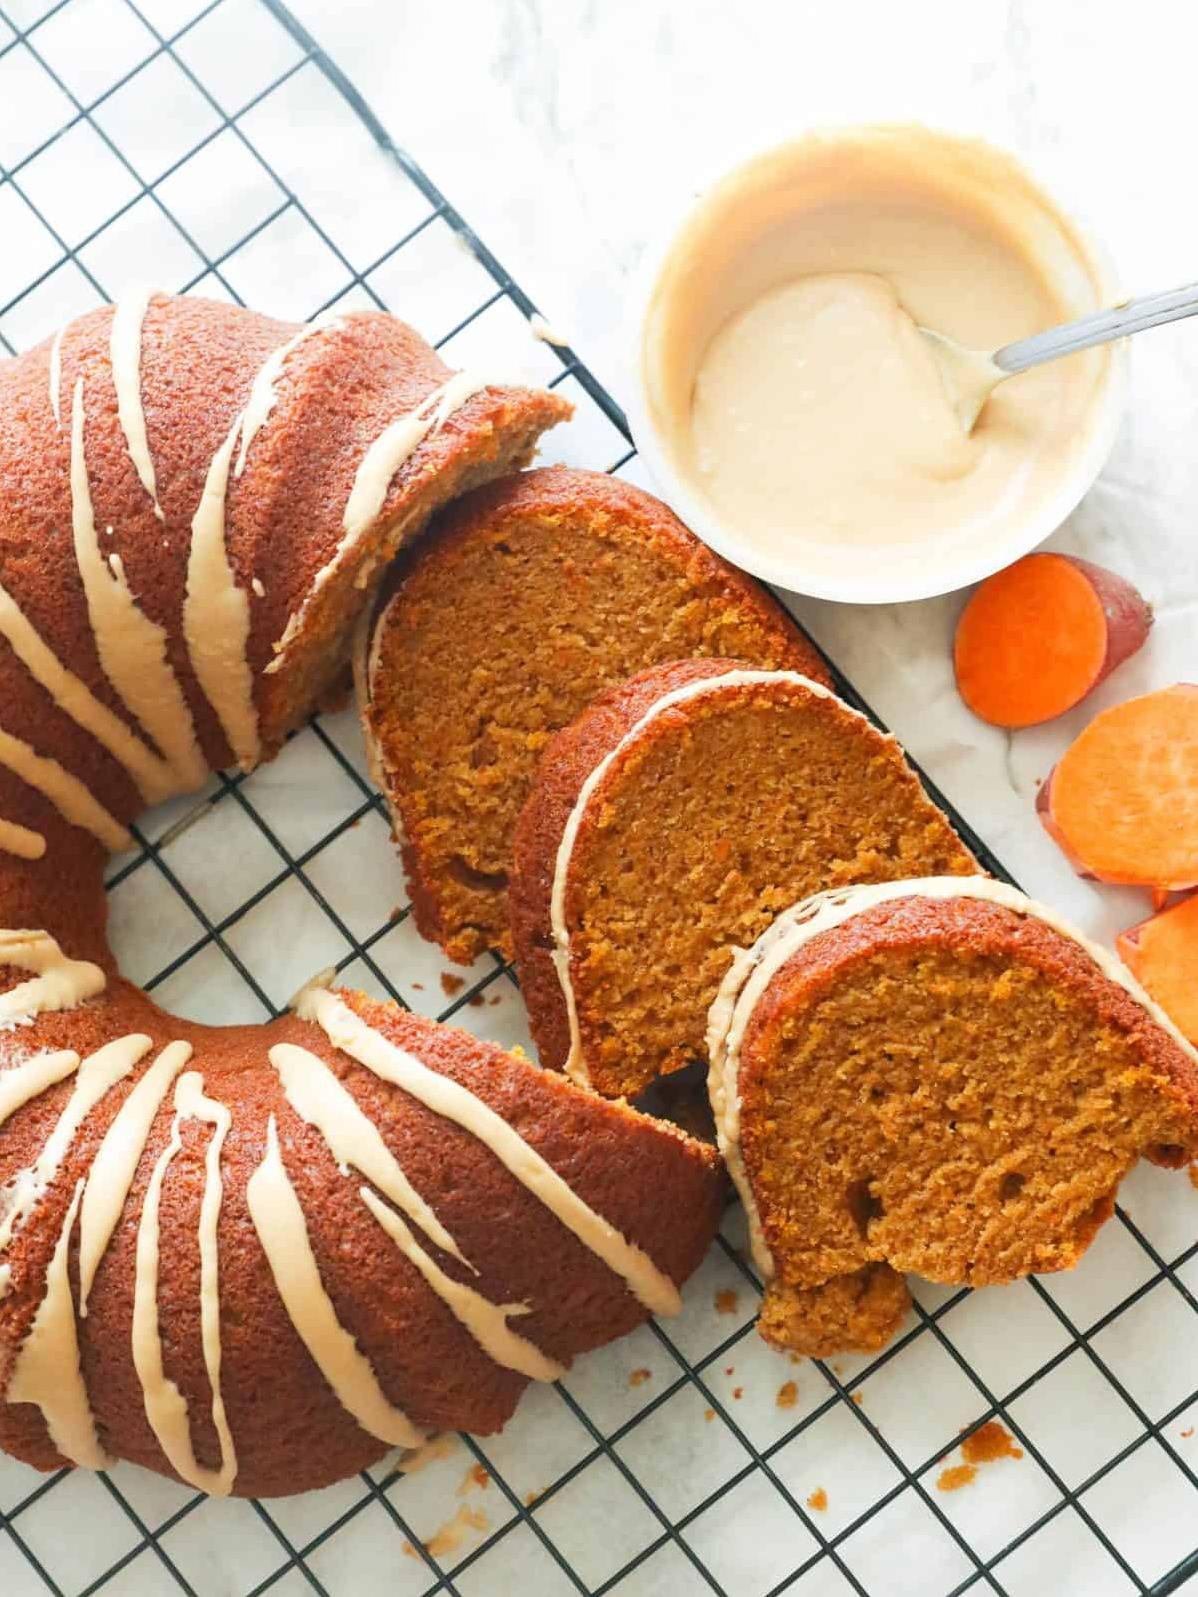  A slice of this pound cake is like taking a bite out of pure sunshine.